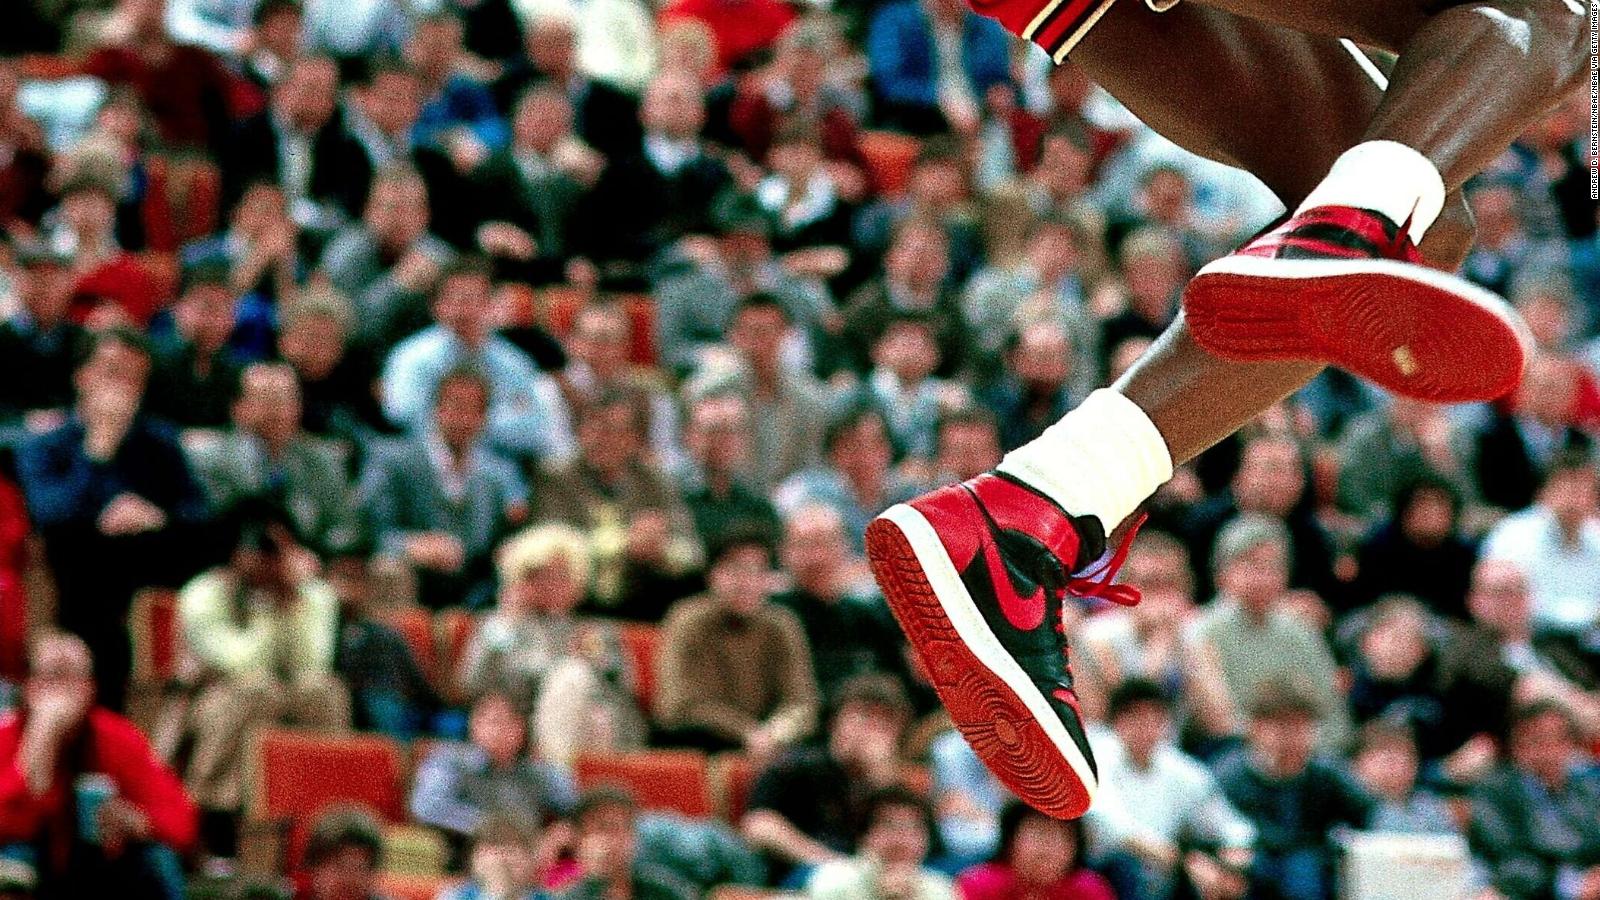 mj banned shoes